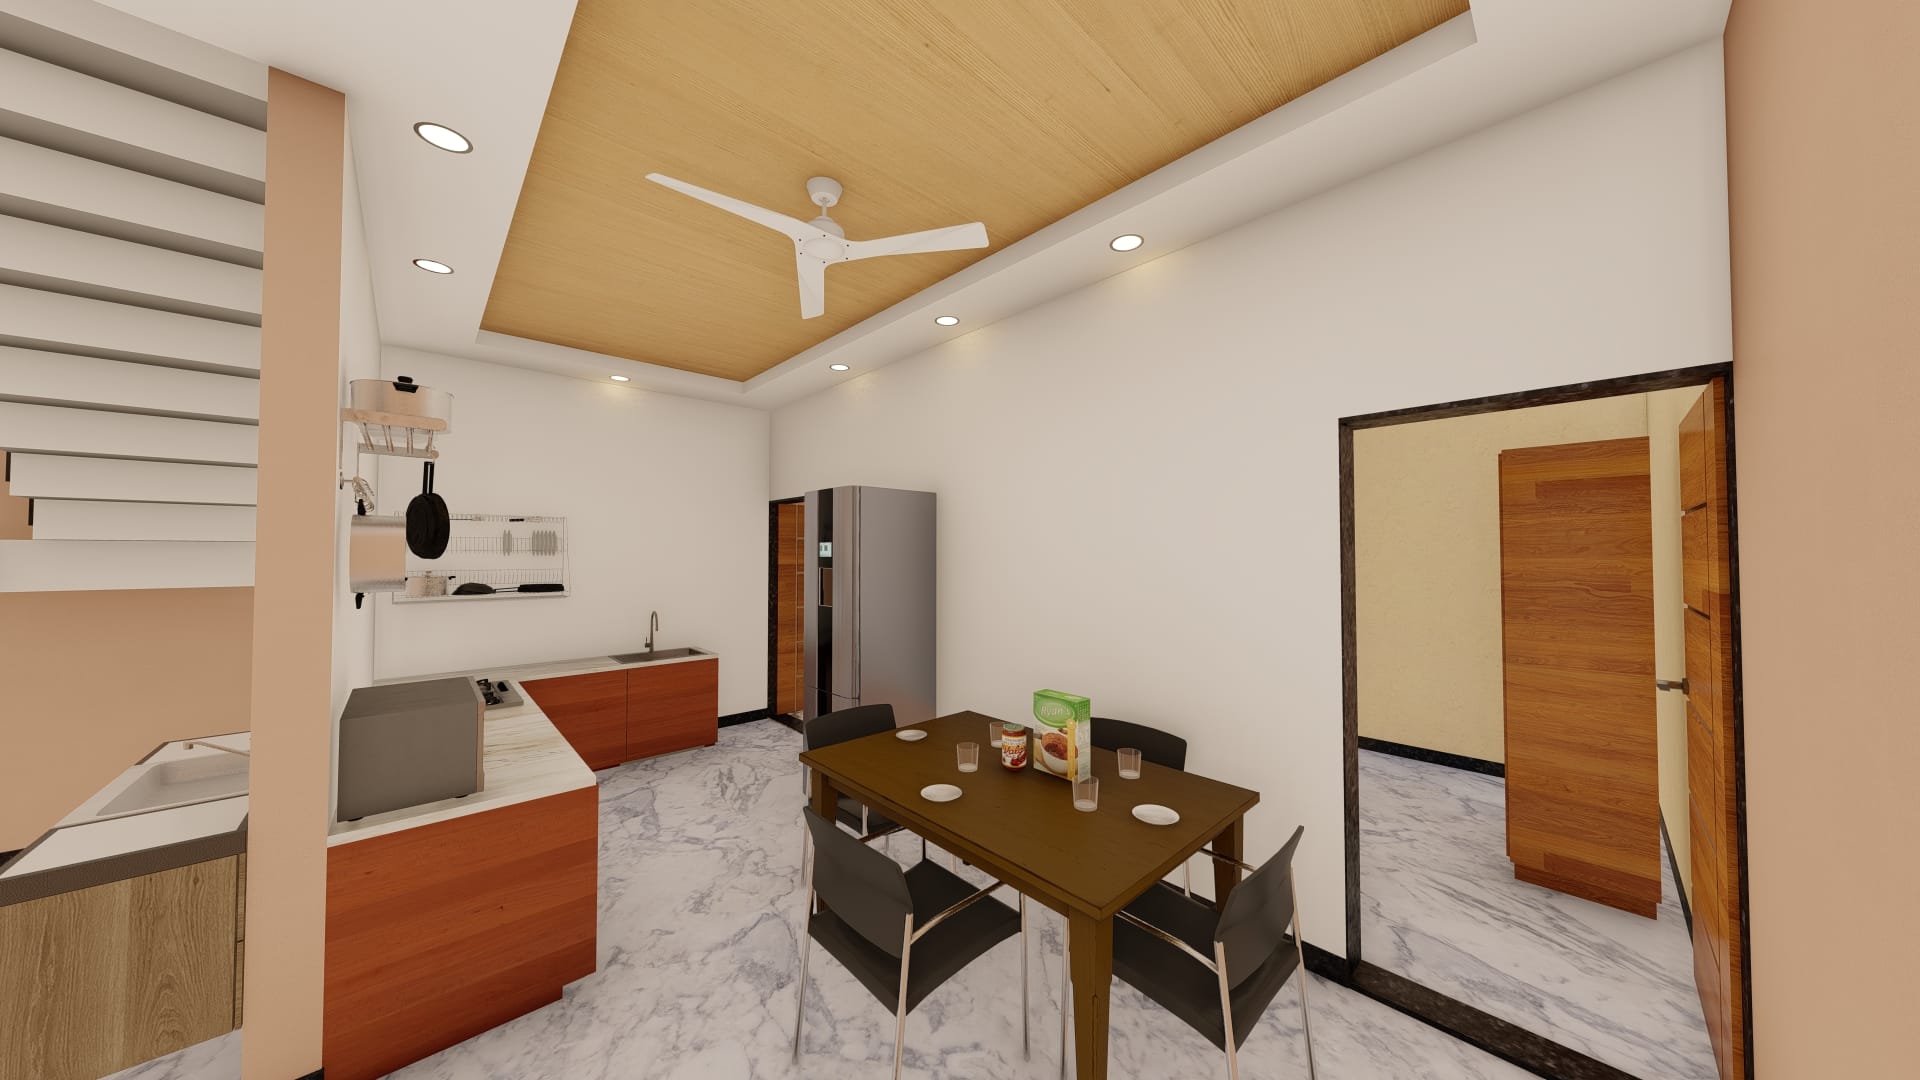 large size kitchen with dining area of new duplex layout design north facing 1000 sq ft urban terrace